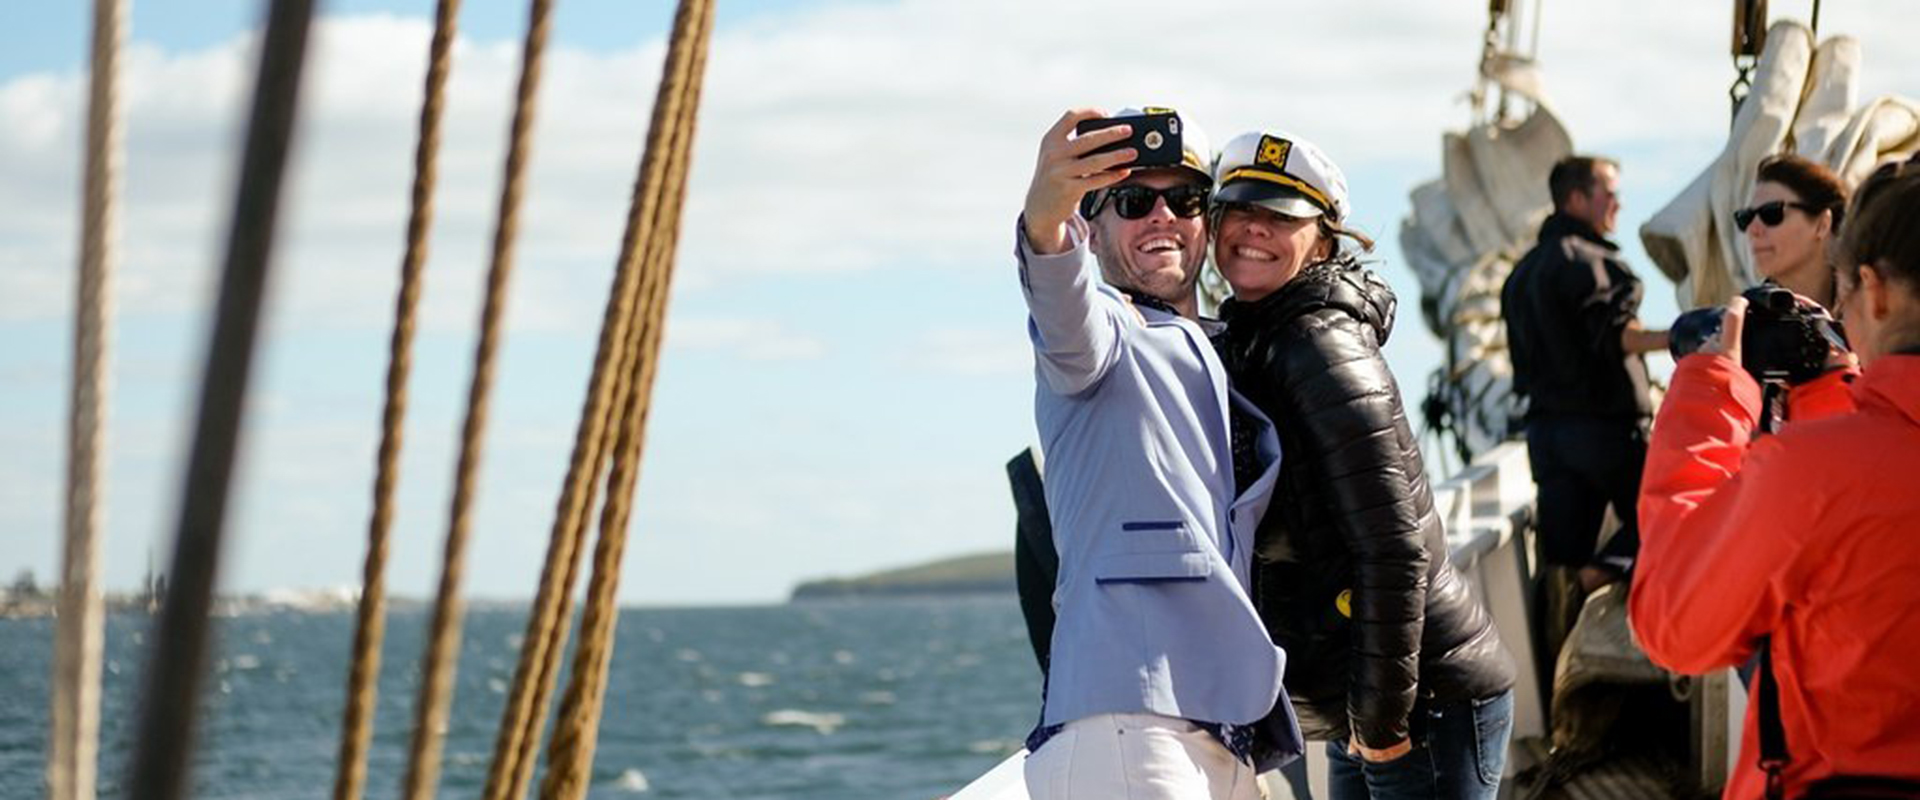 Couple taking a selfie on the Bluenose while media captures photos.